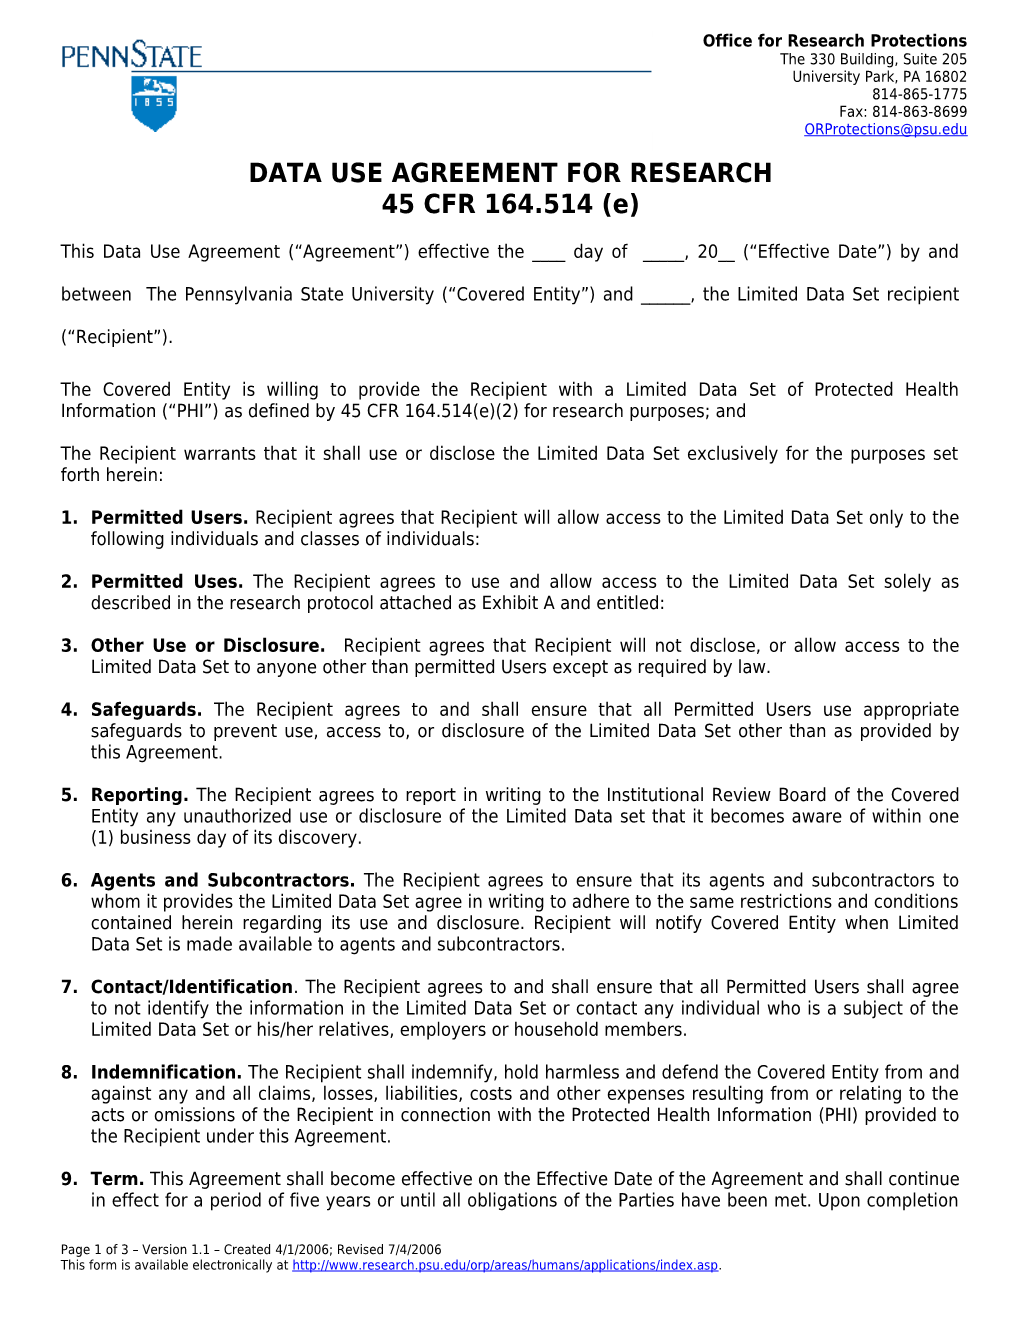 Data Use Agreement for Research